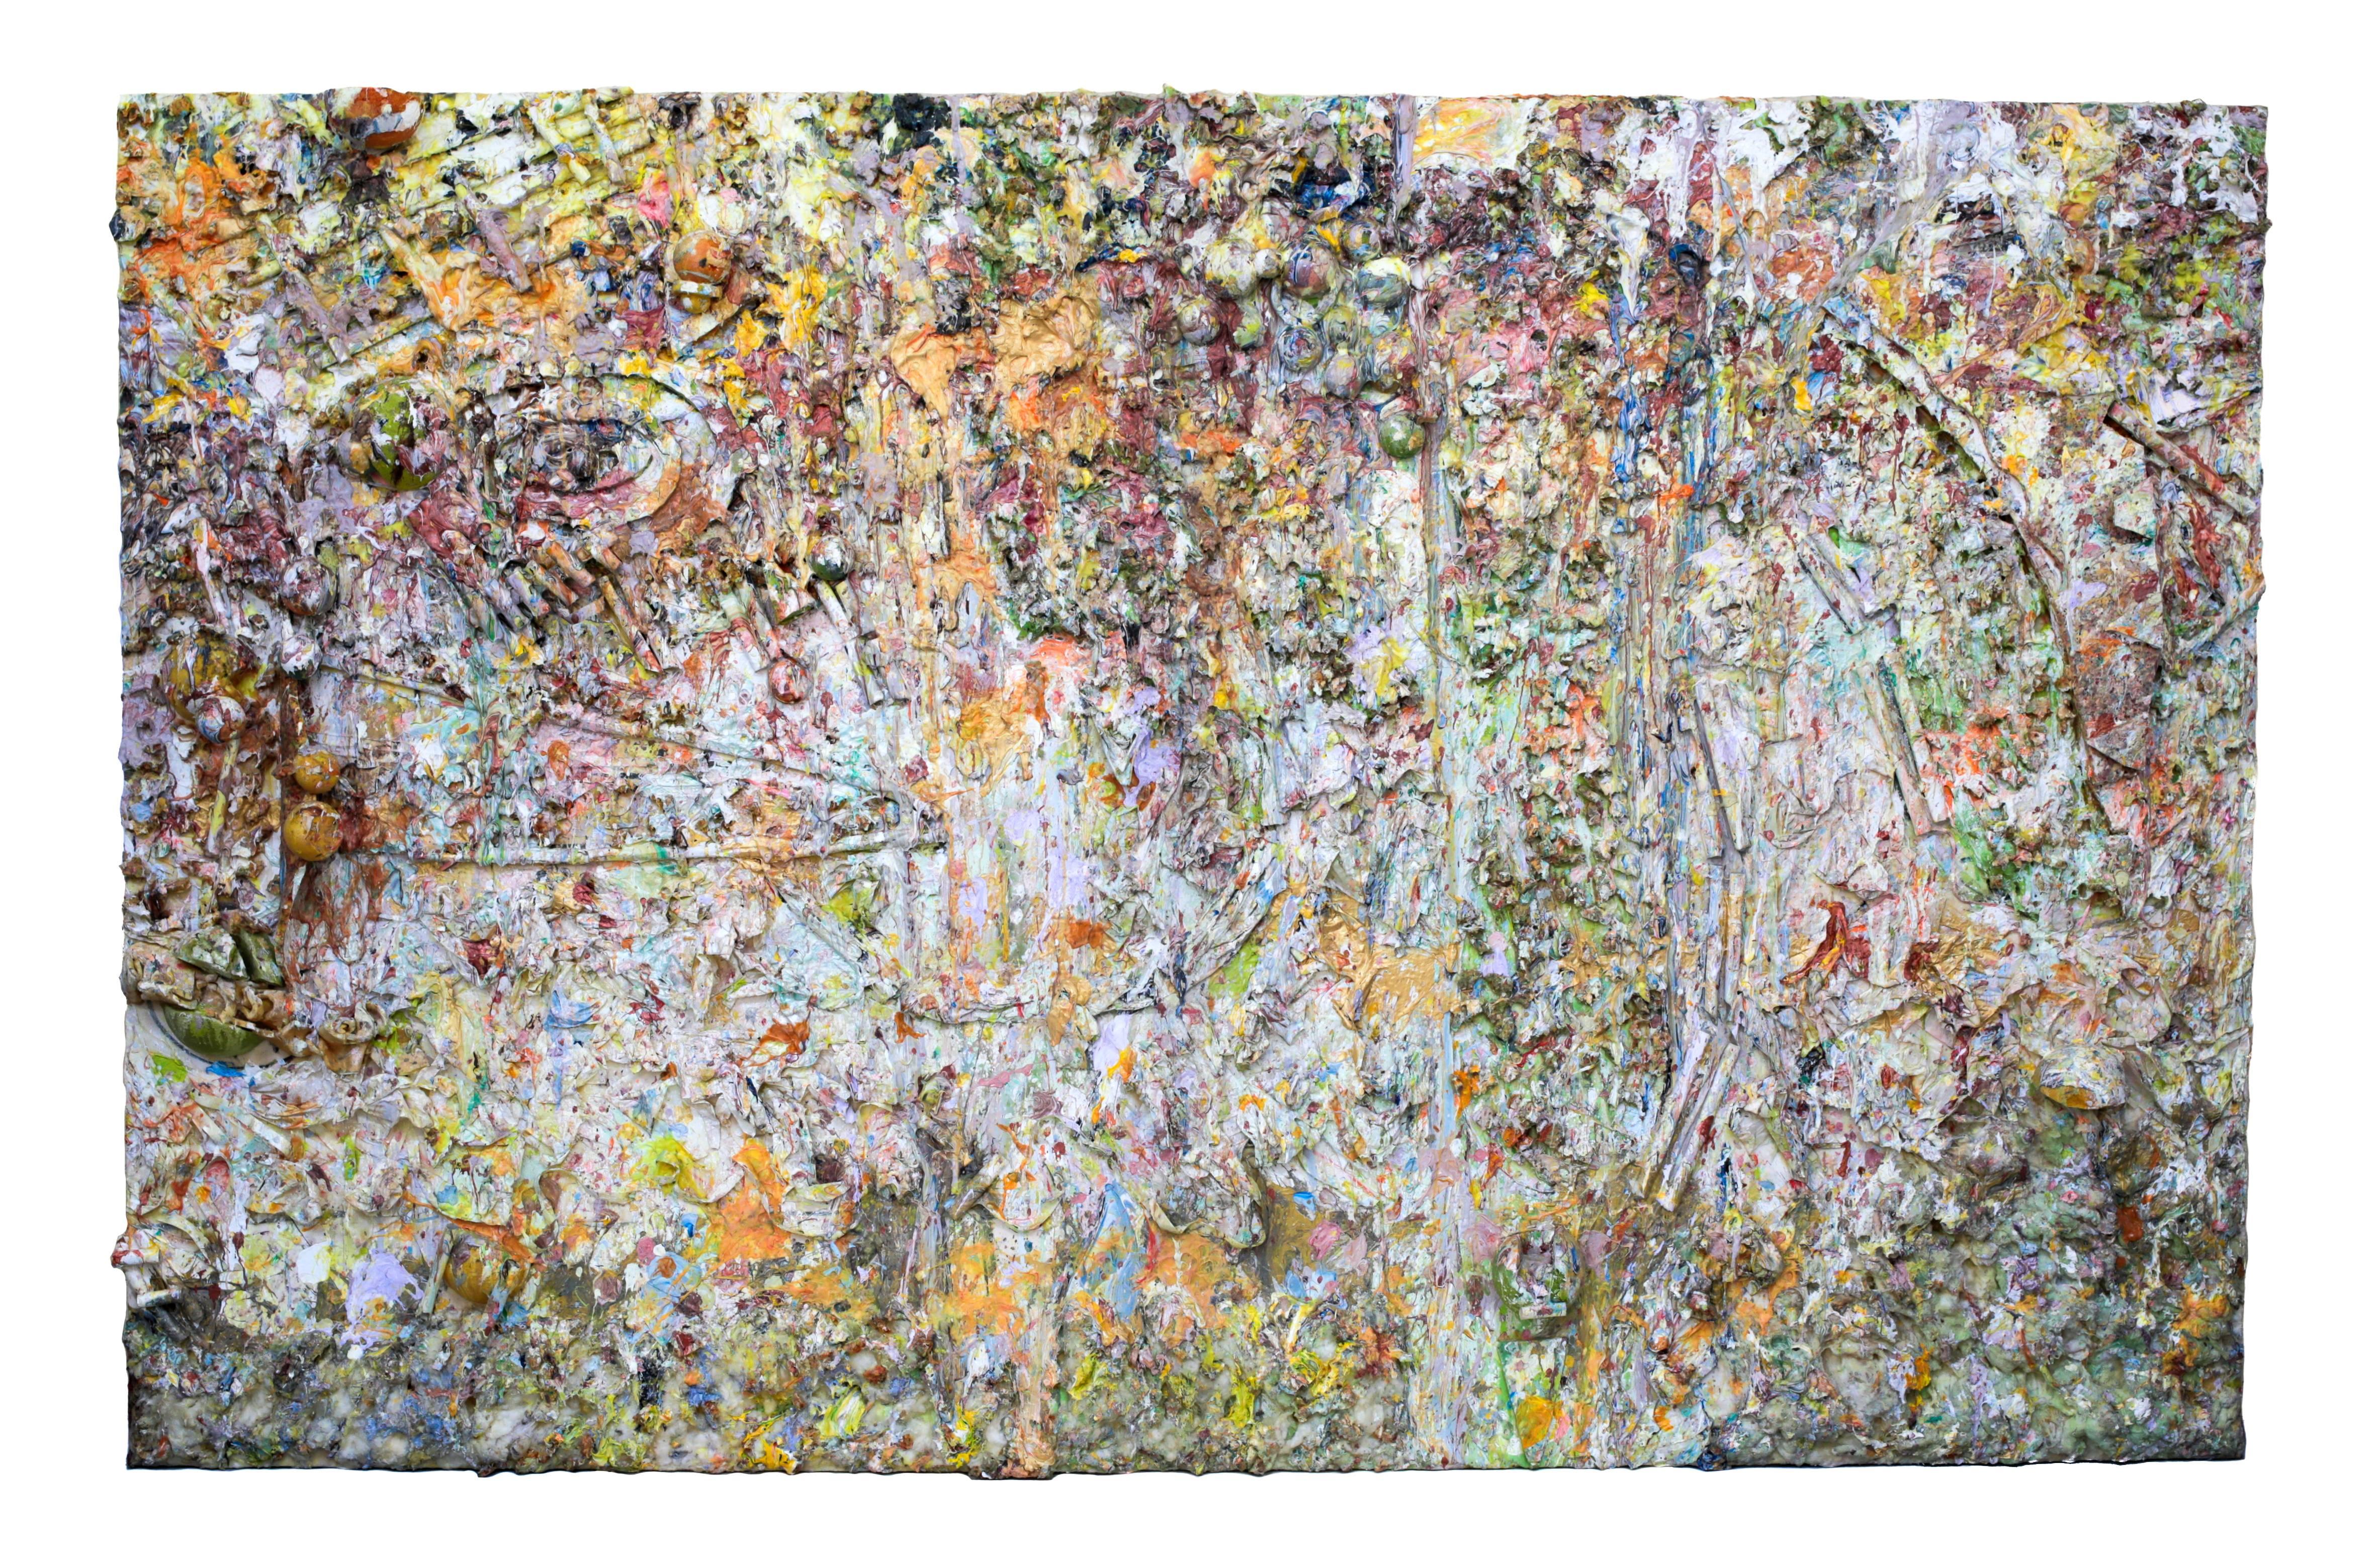 A massive abstract acrylic and mixed-media painting on canvas by Larry Poon (American, 1937-). Cut and applied foam, rolled and twisted cardstock, titled Retrieval. Signed and dated on the verso.

Currently oriented horizontally, with a width of